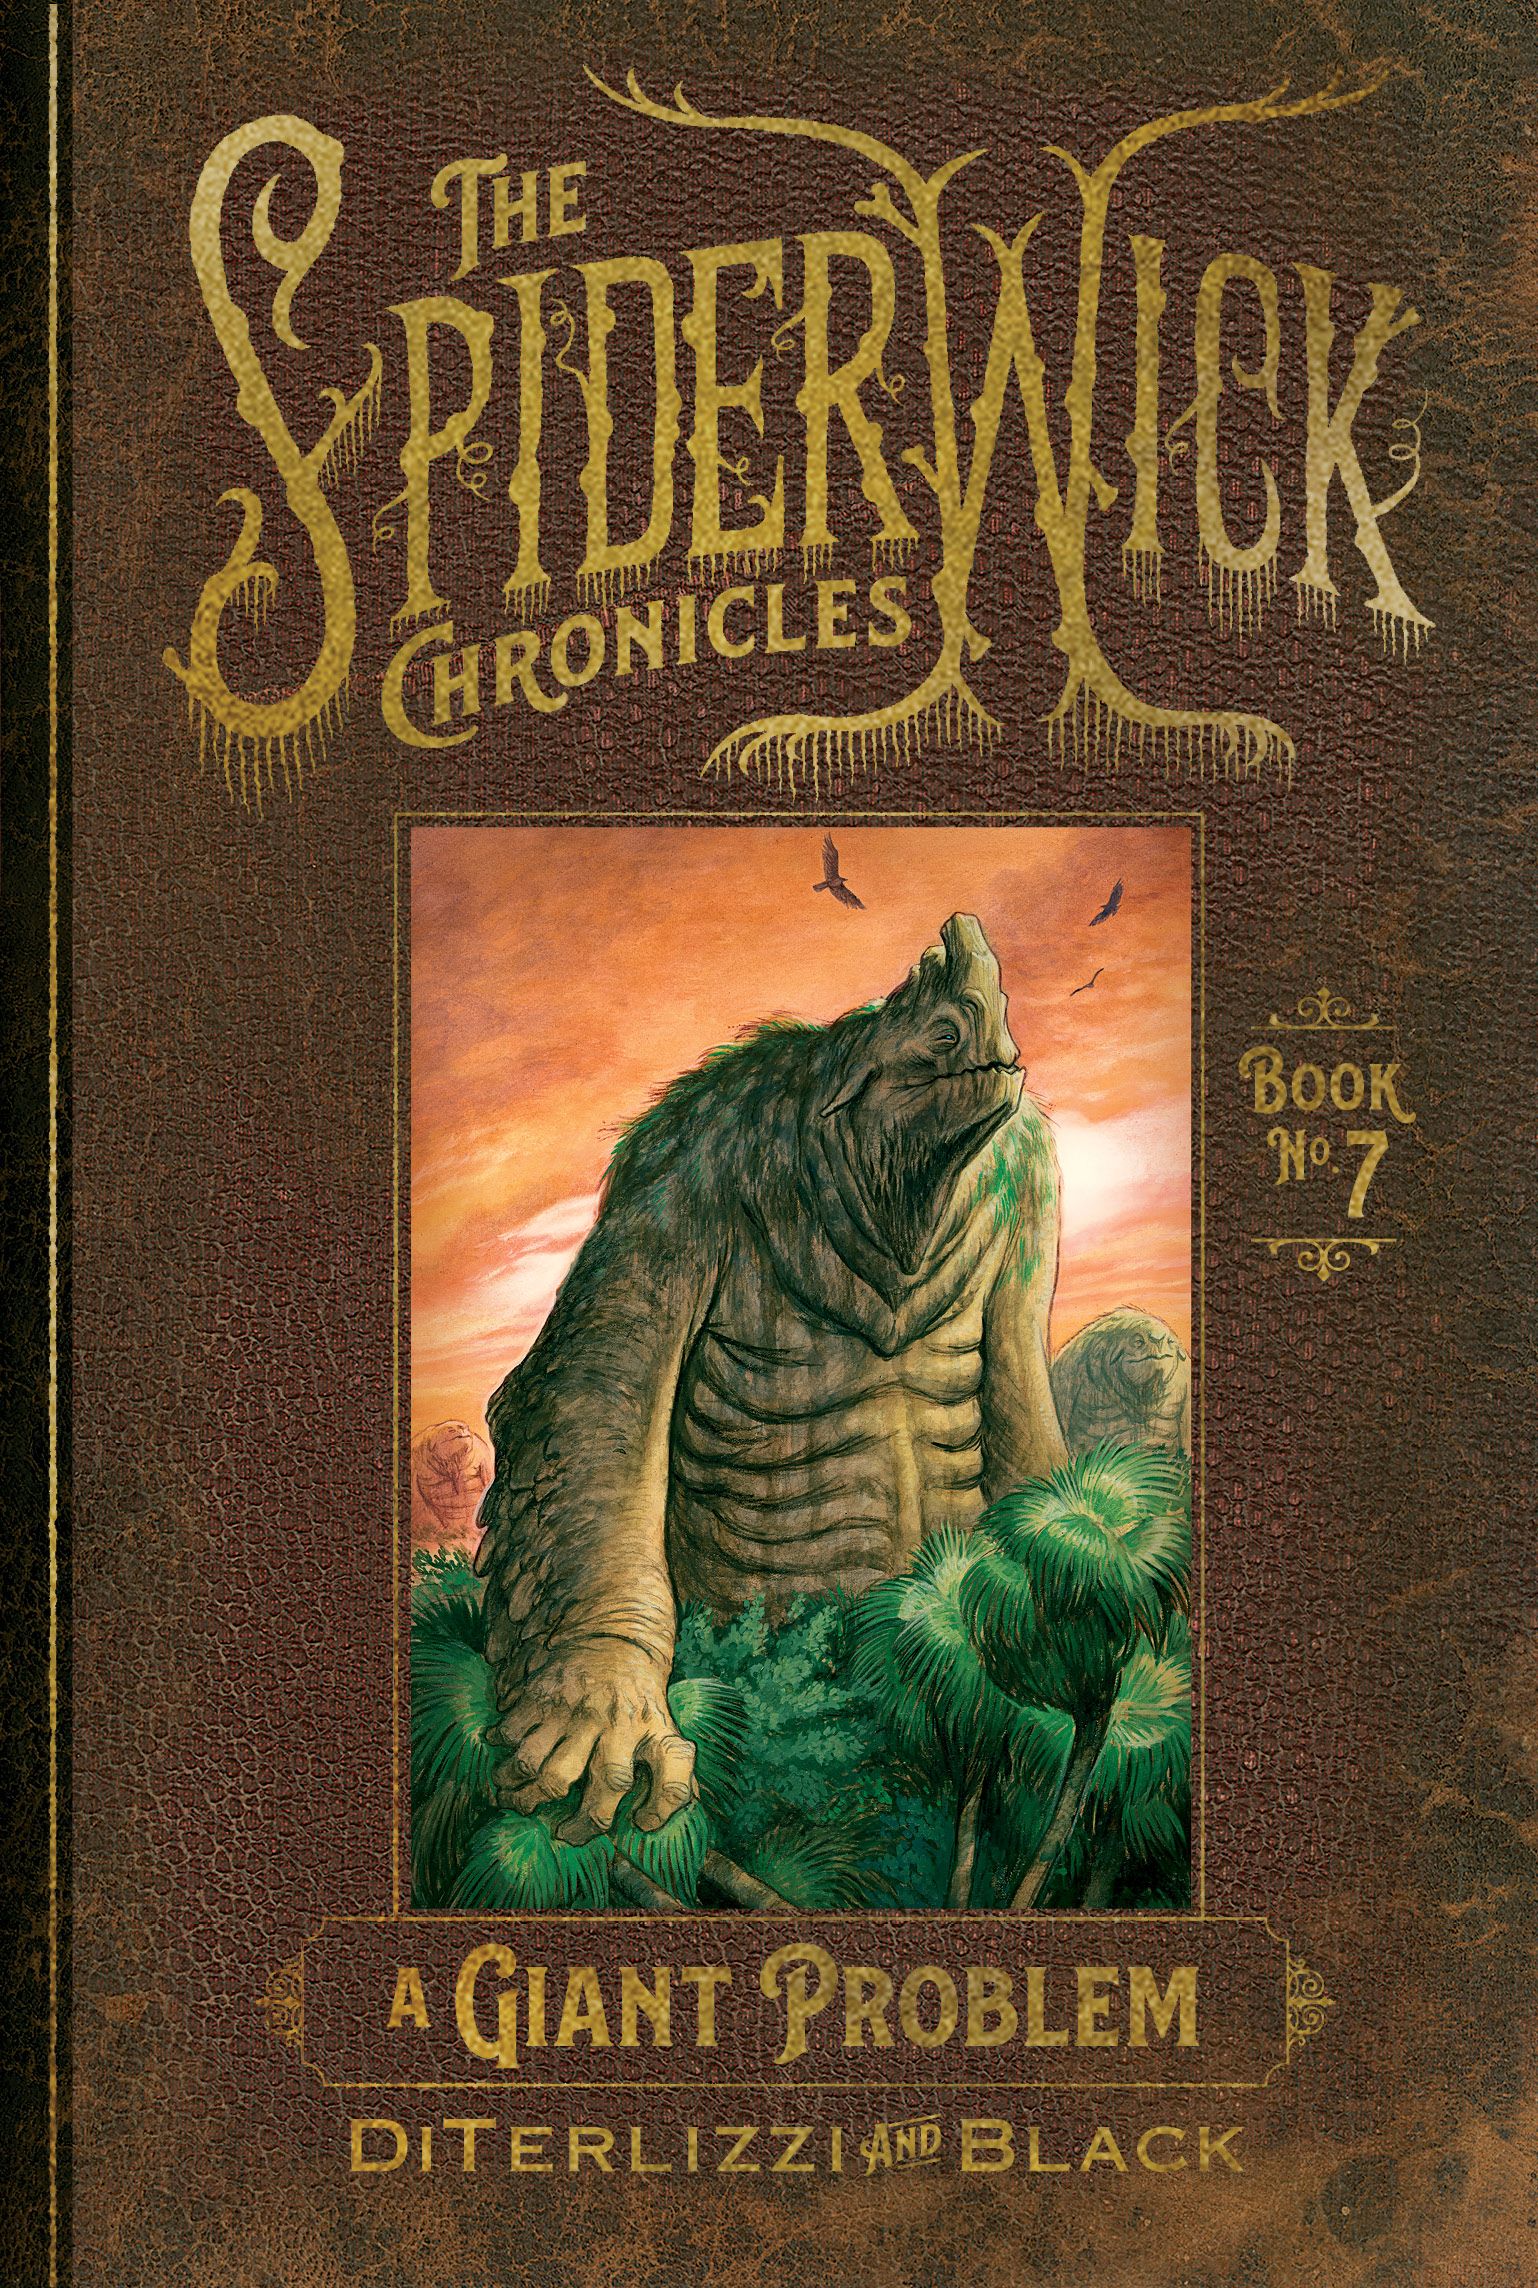 the-spiderwick-chronicles-return-to-shelves-with-new-covers-exclusive